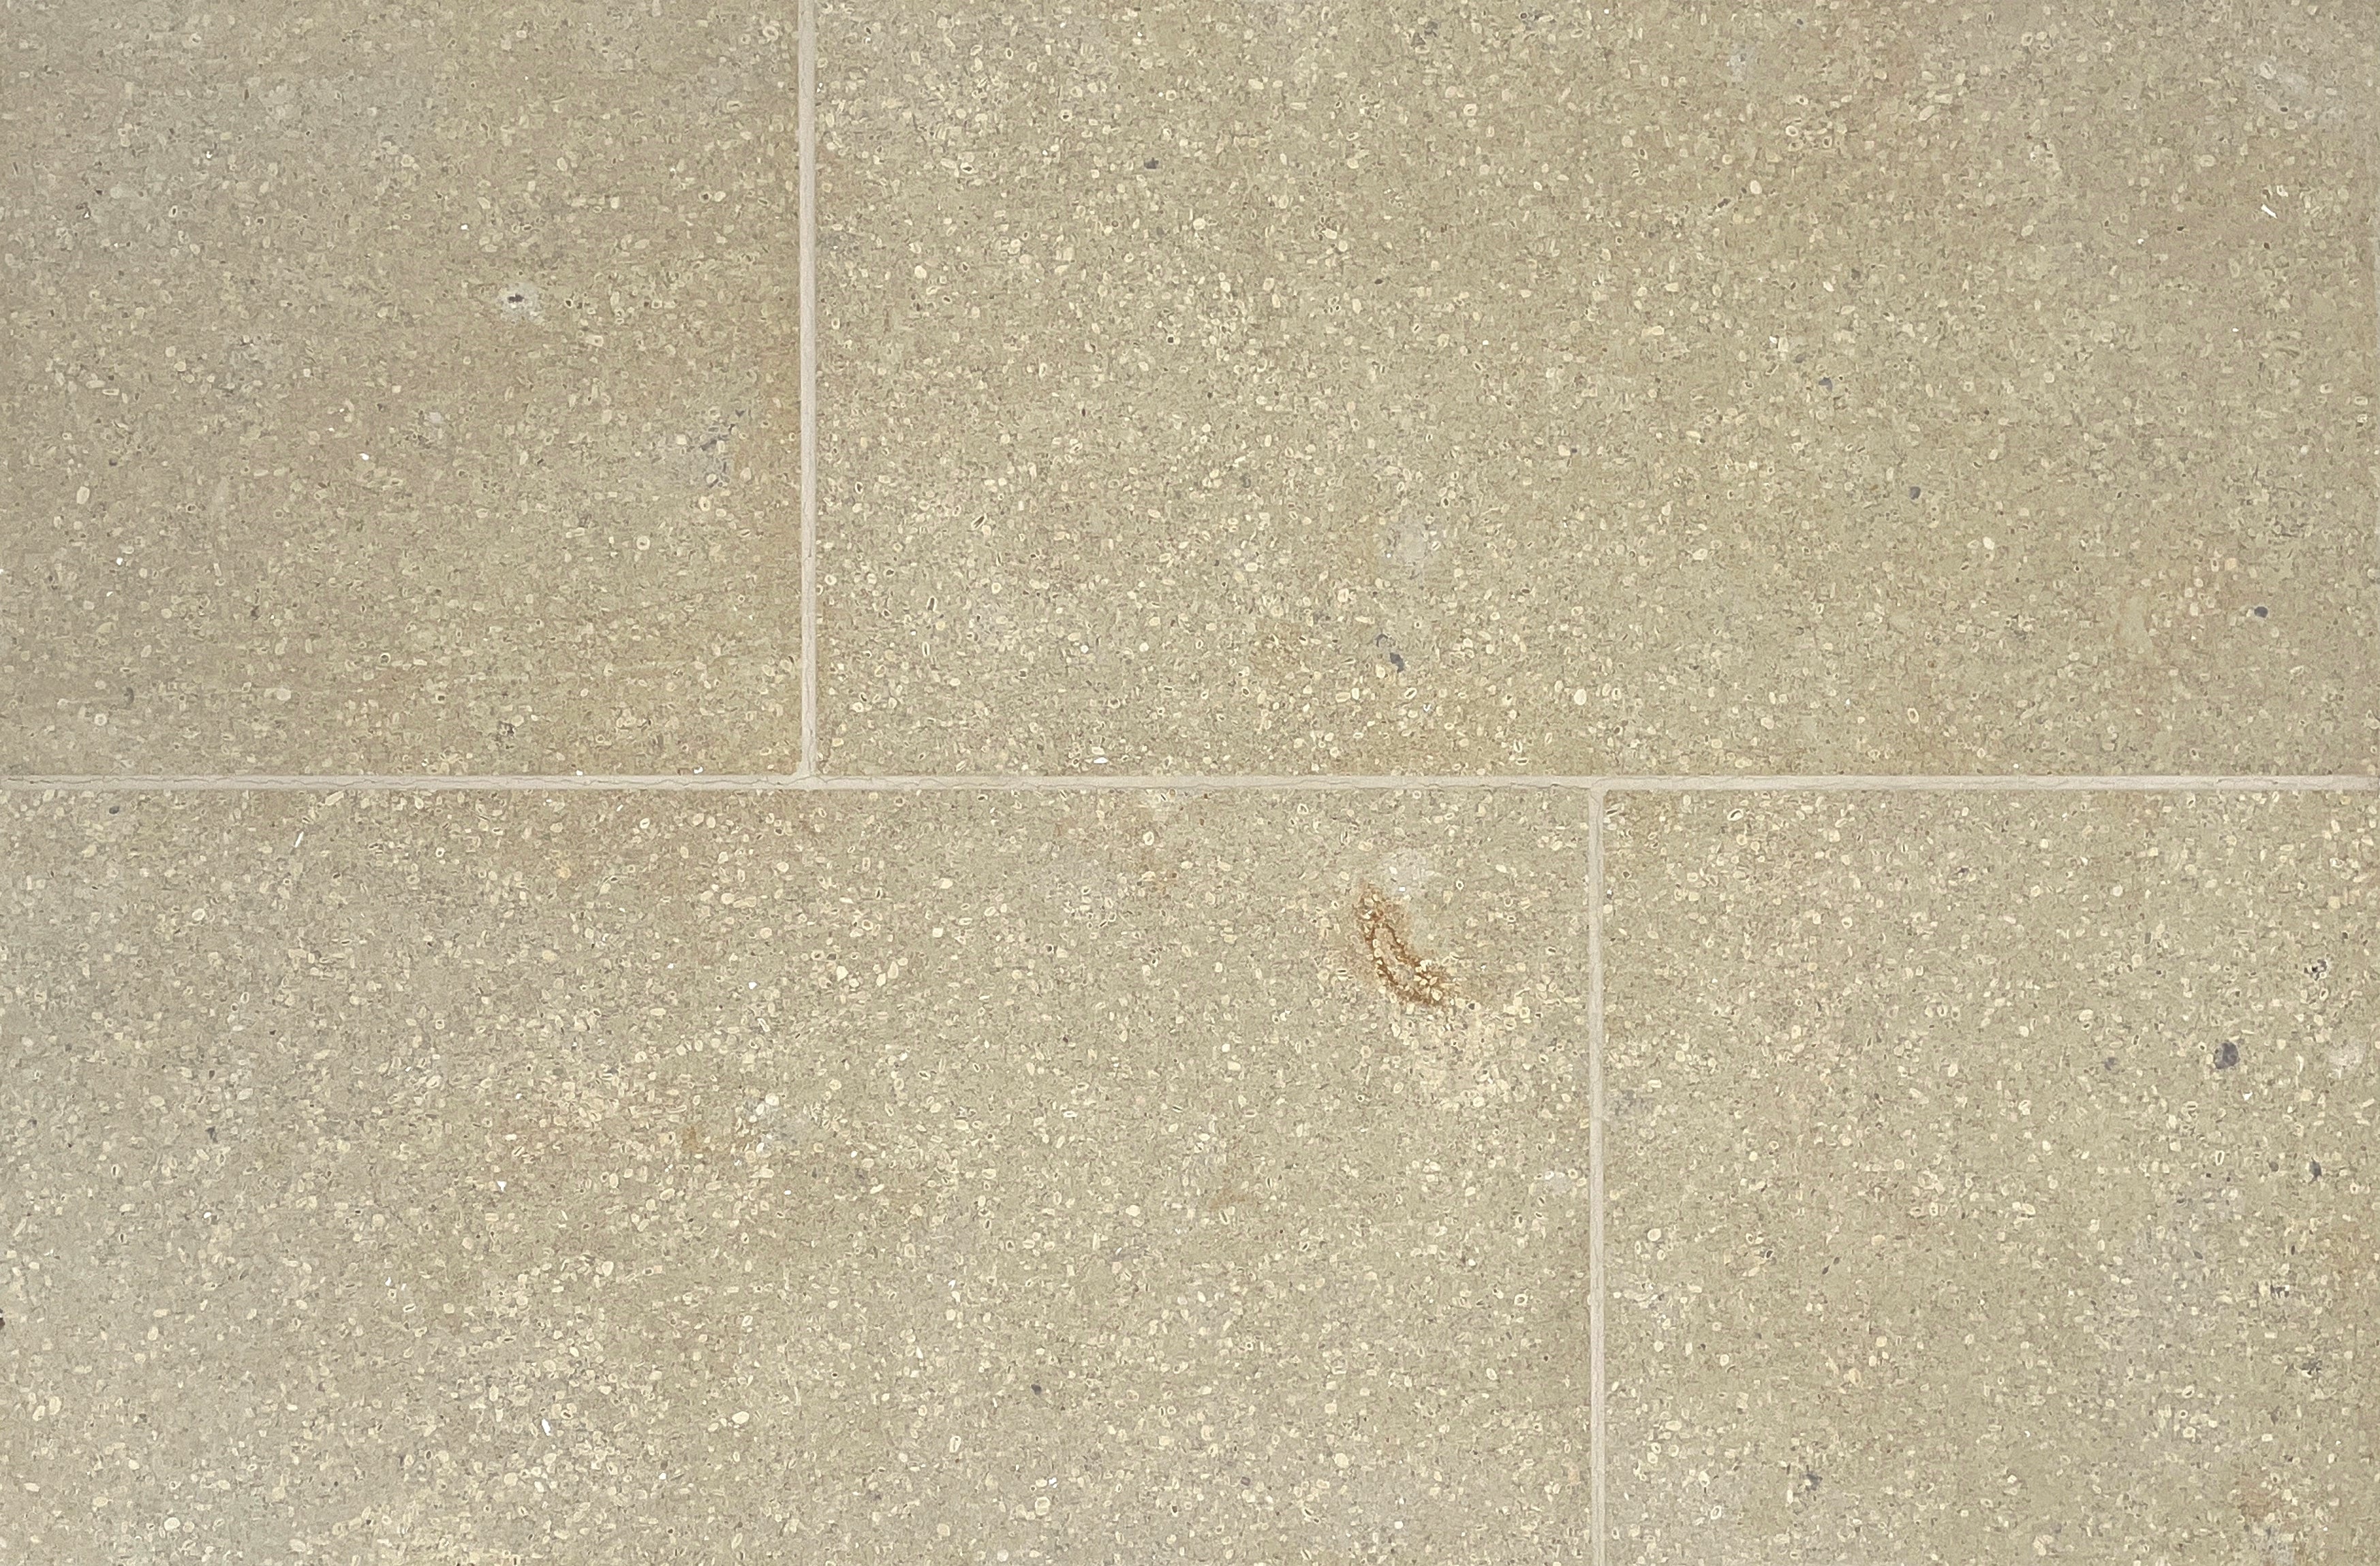 american limestone suede beige versailles pattern interior natural stone tile for floor and wall made in united states distributed by surface group international